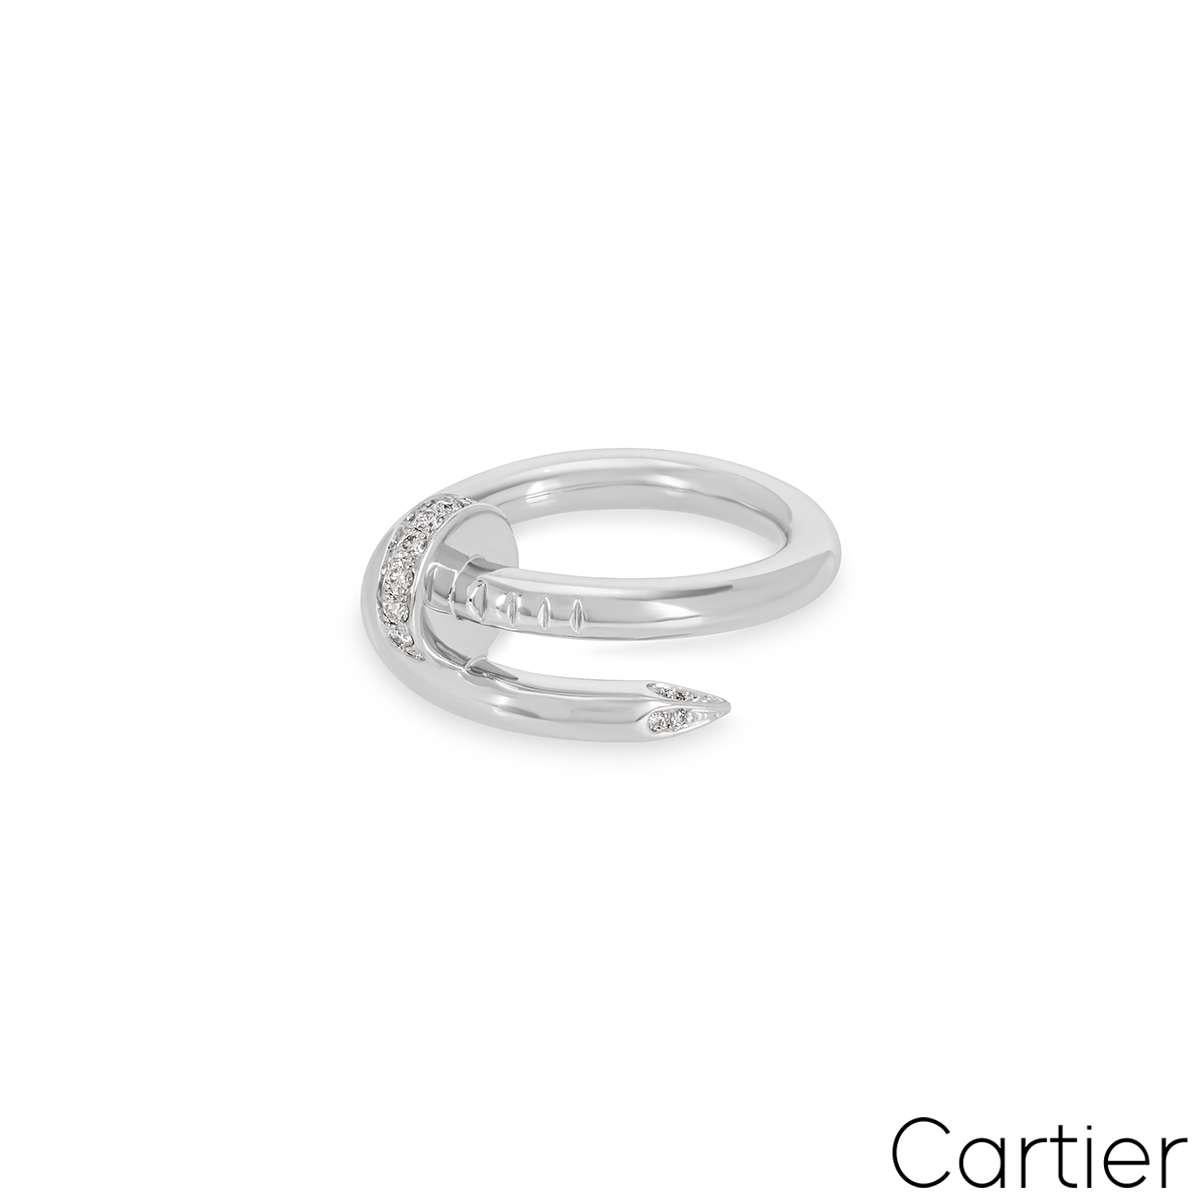 Cartier White Gold Diamond Juste un Clou Ring Size 51 B4092700 In Excellent Condition For Sale In London, GB